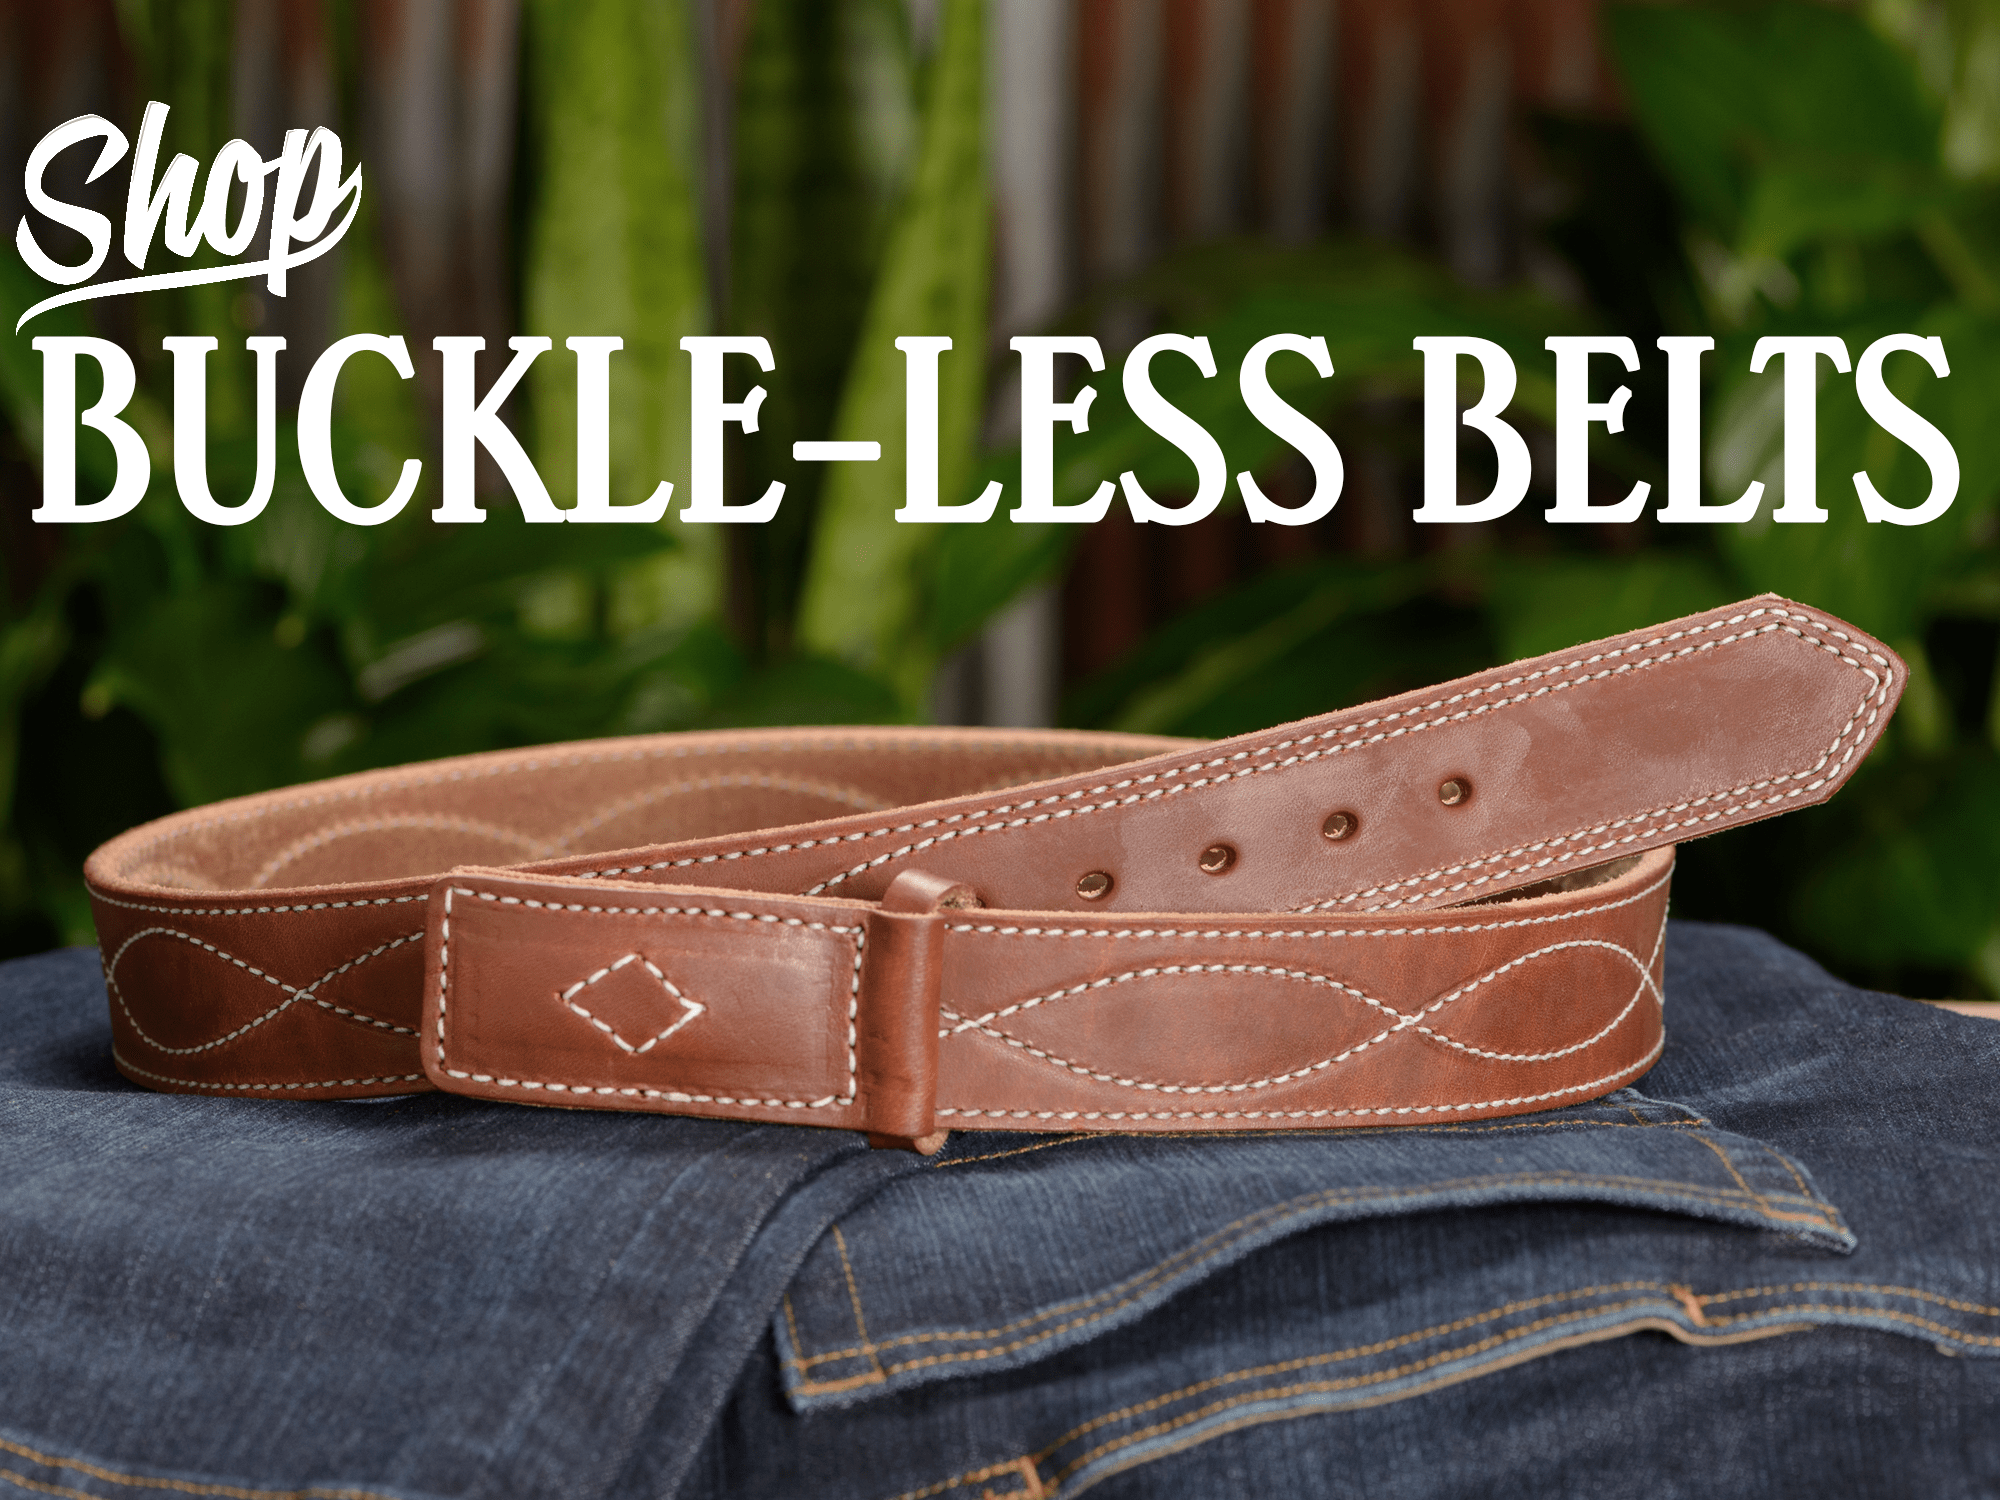 High Quality Handcrafted USA Made Work Belts | Amish Made Belts